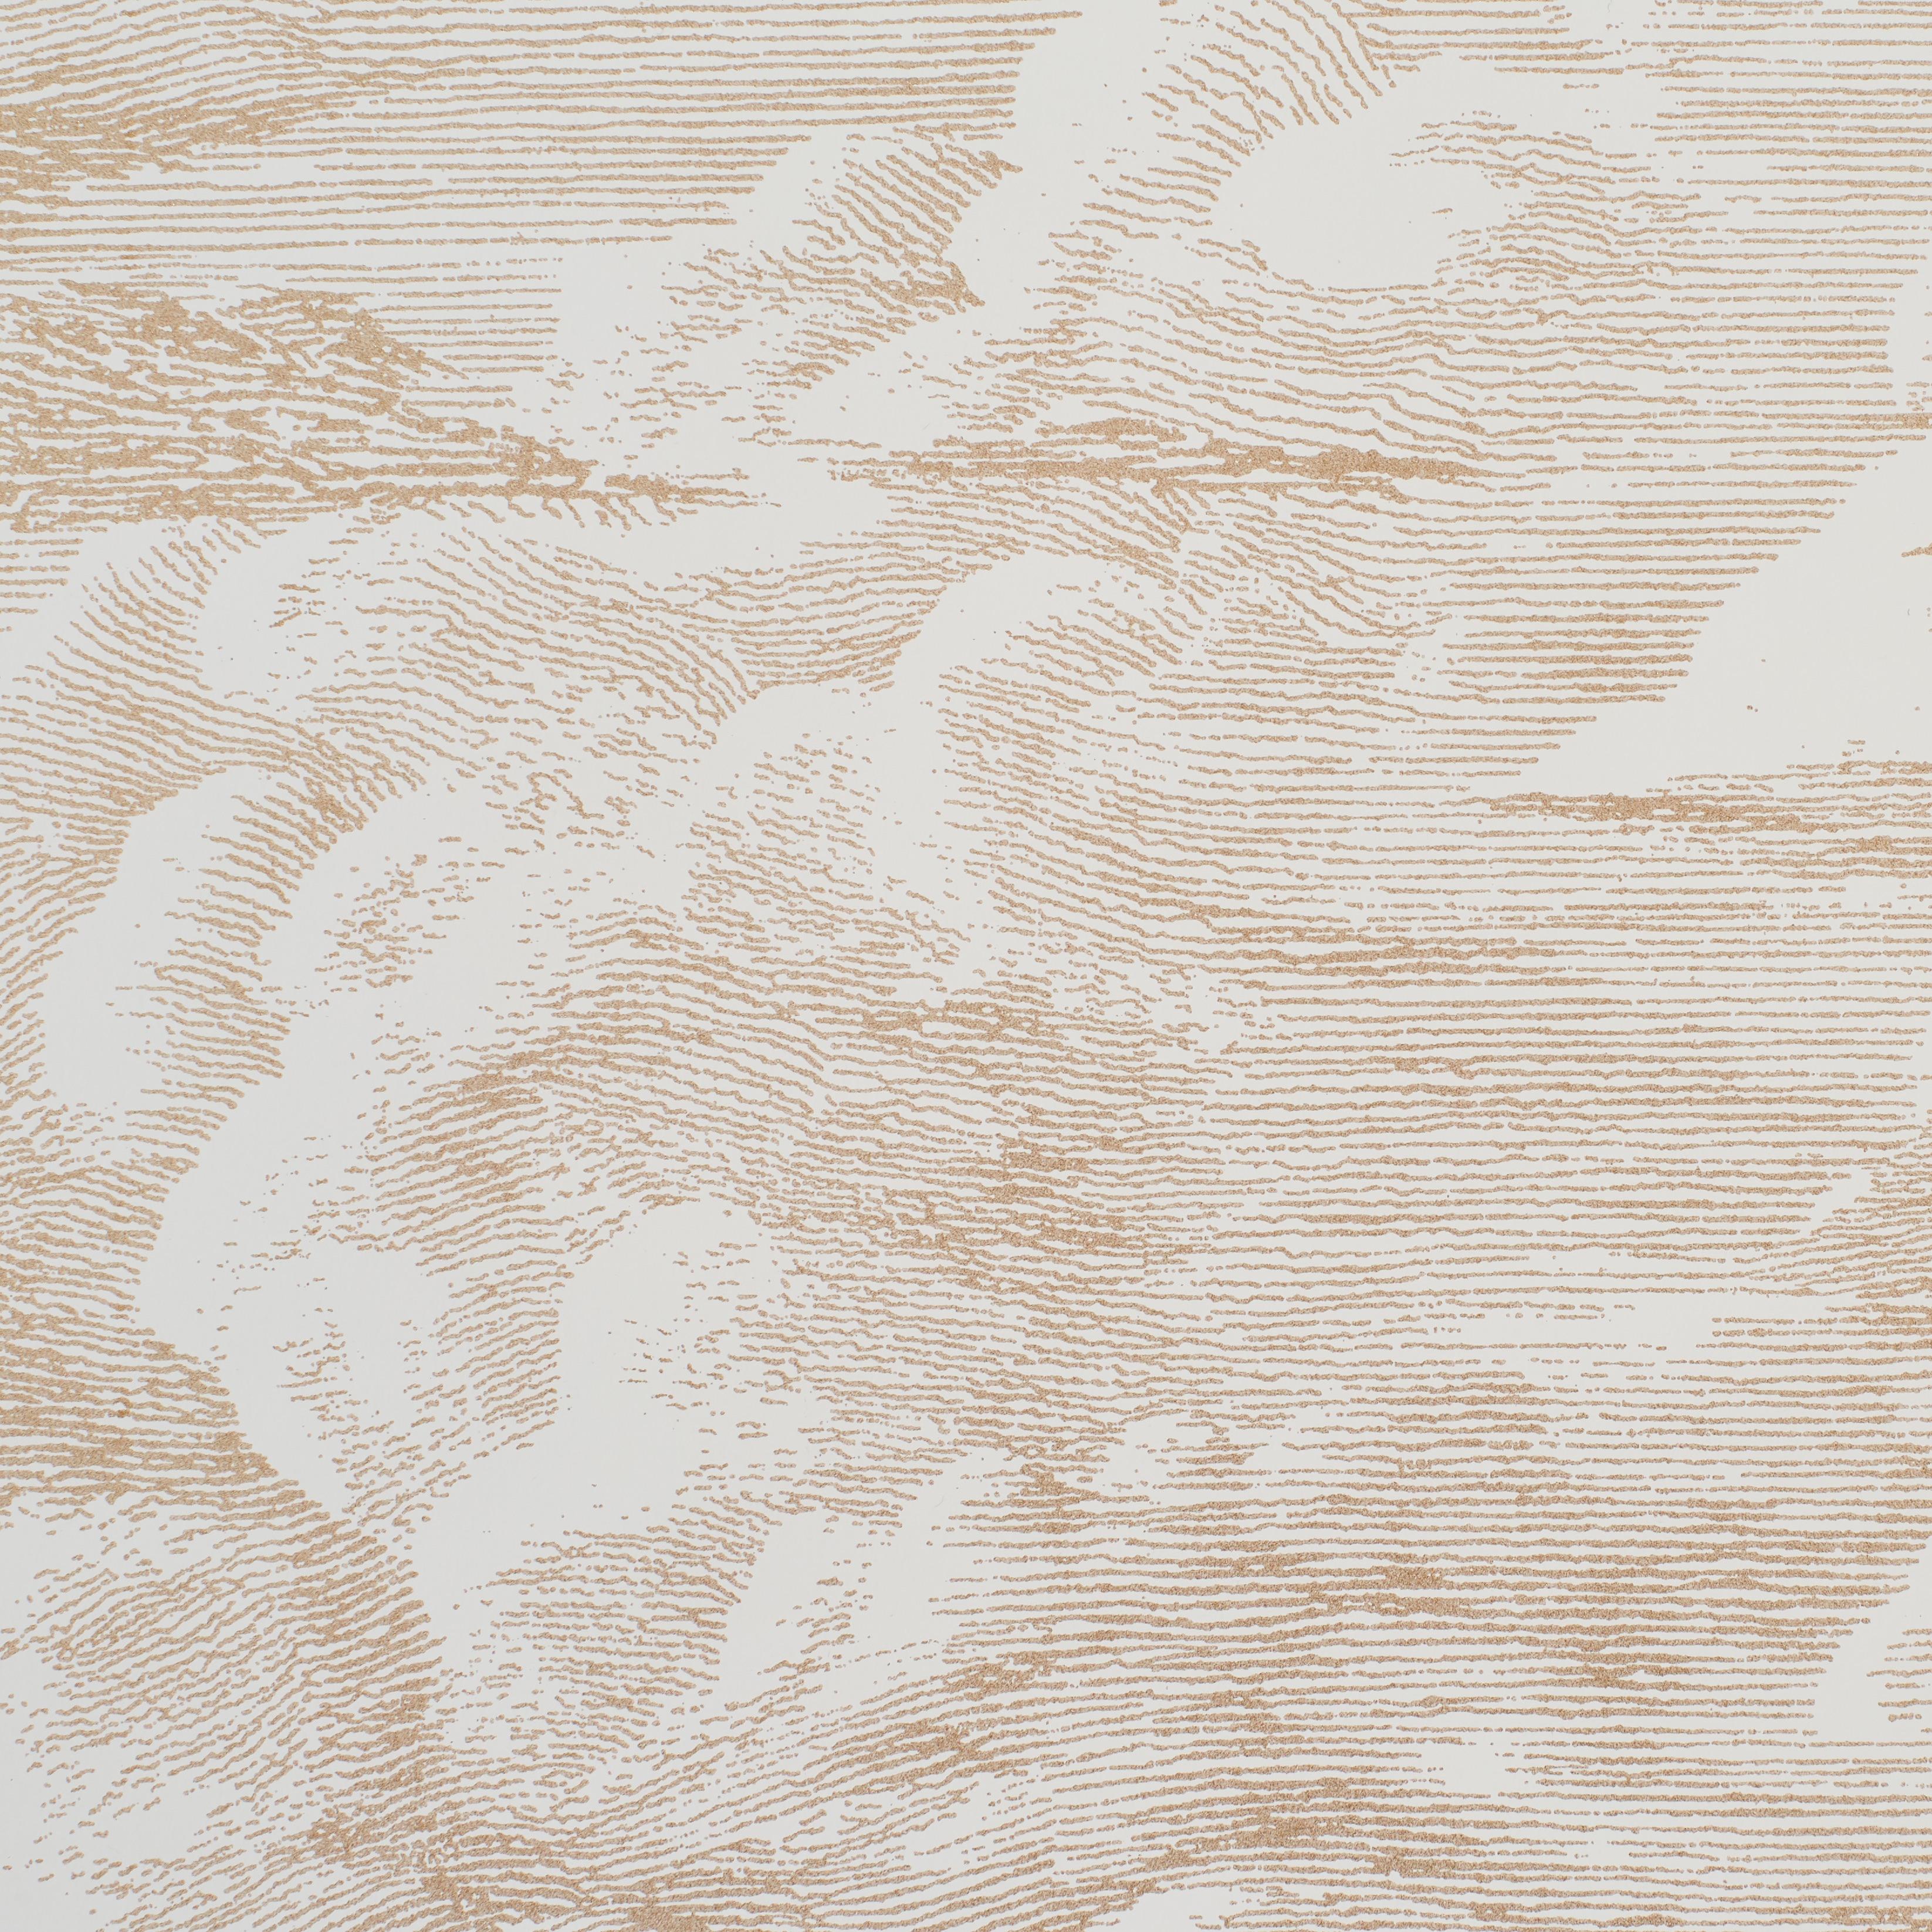 A sumptuous take on a design that debuted in the 1970s, this wide-width, screenprinted cloud pattern has unique depth and an ethereal, mural-like effect. 

Since Schumacher was founded in 1889, our family-owned company has been synonymous with